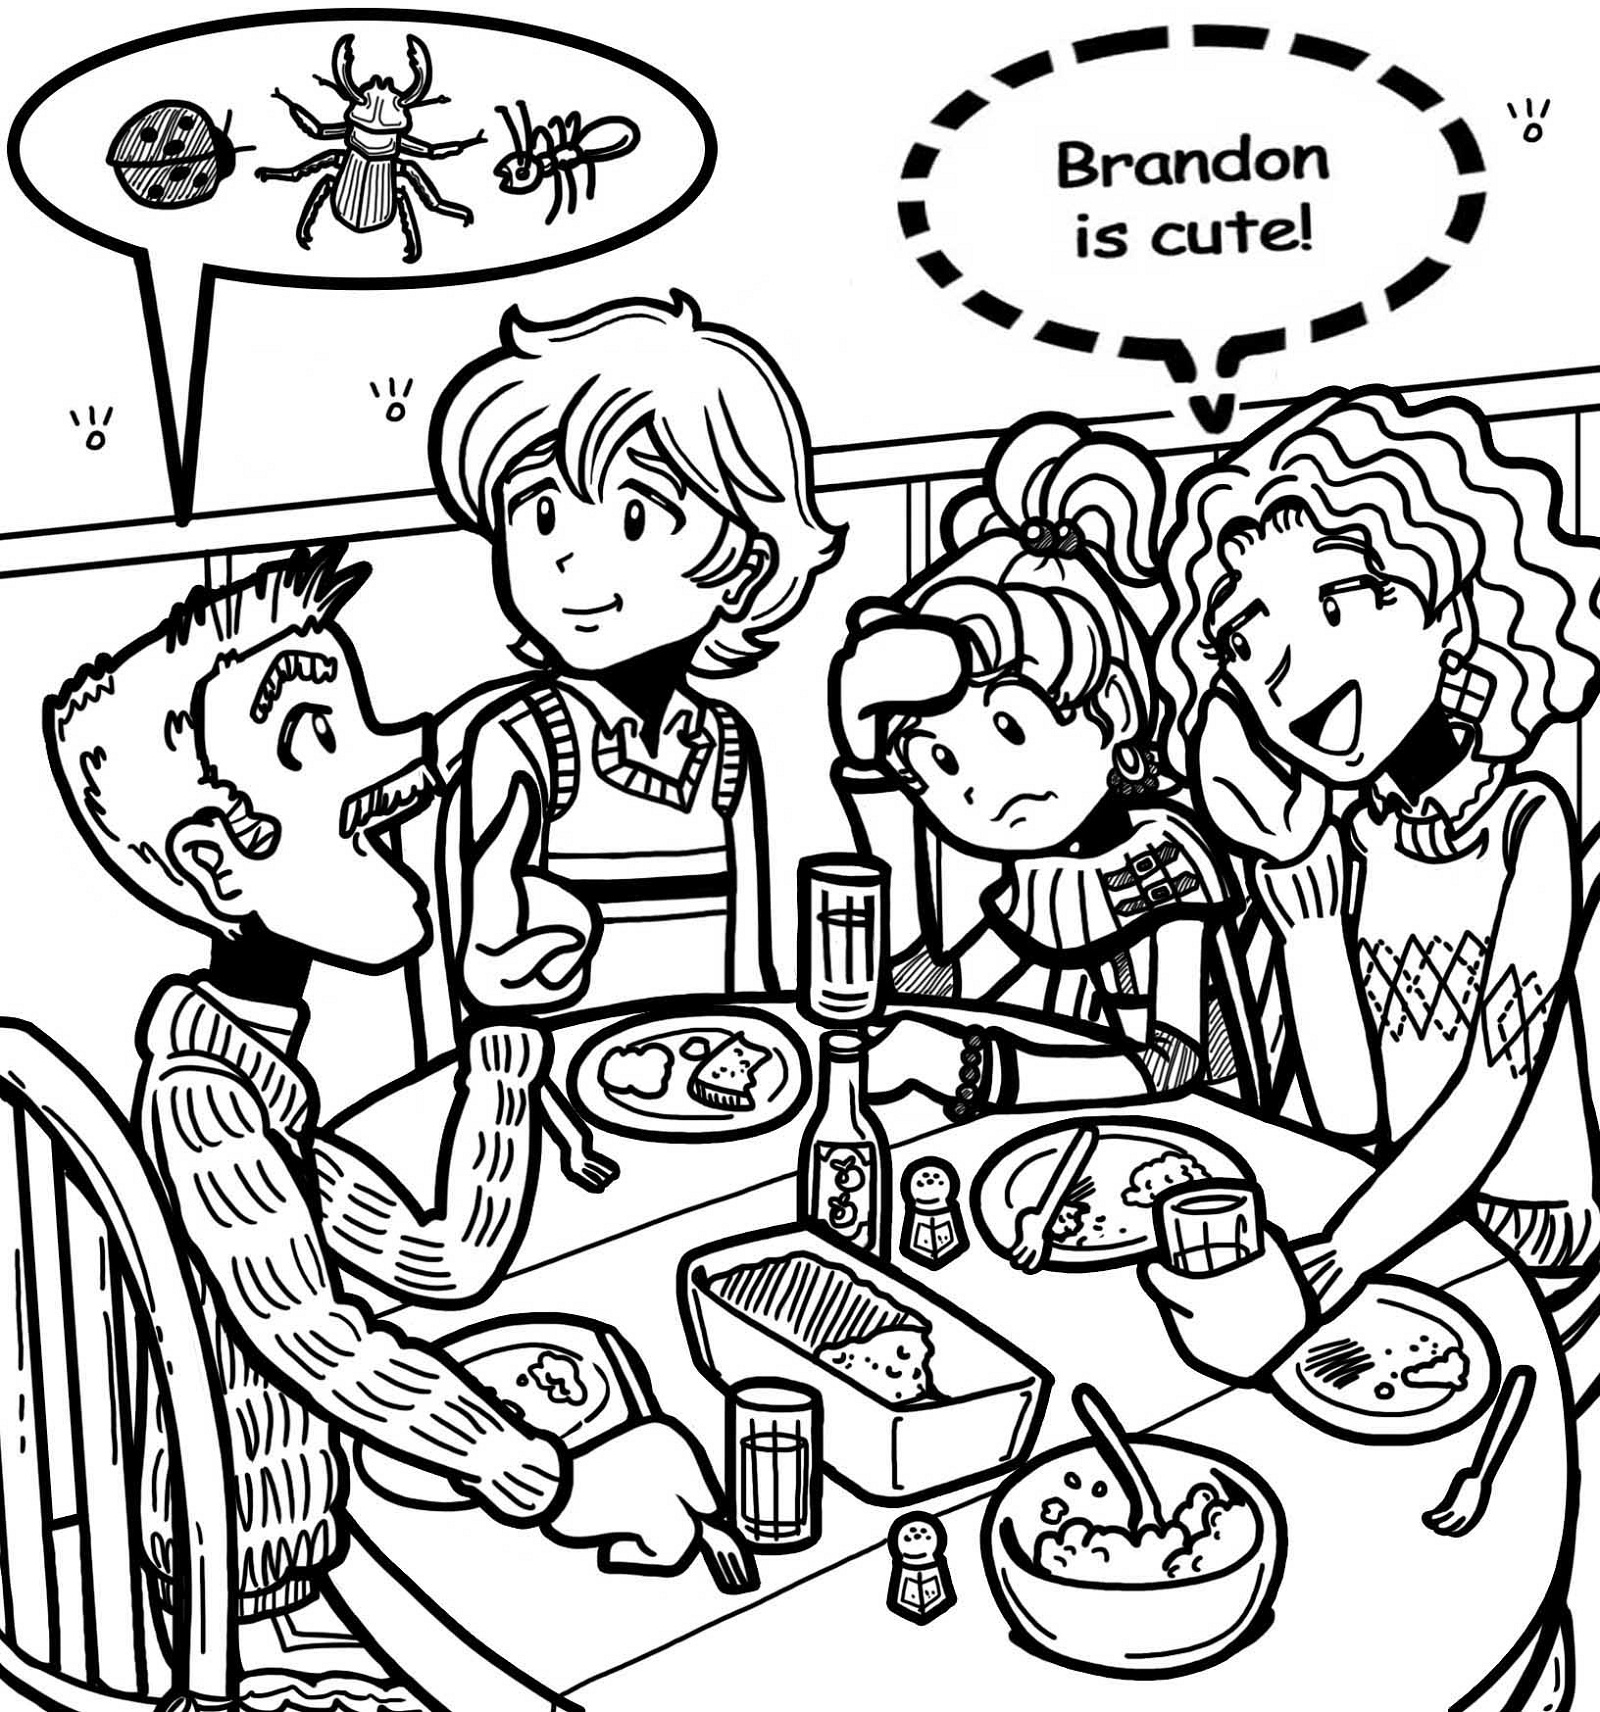 dork diaries coloring pages for kids